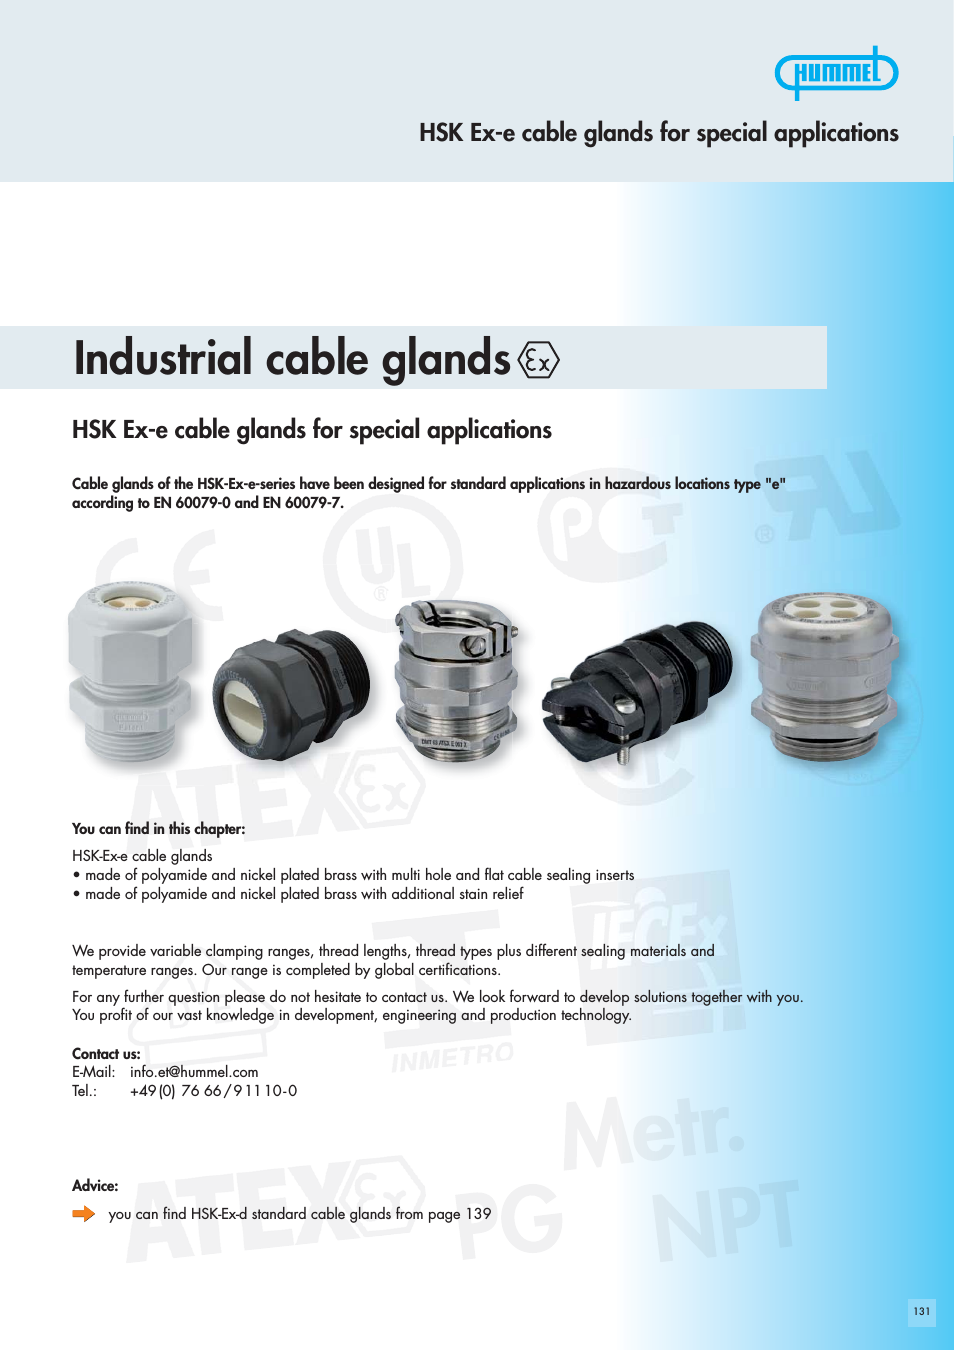 Hummel Ex-e Cable Glands for Special Applications